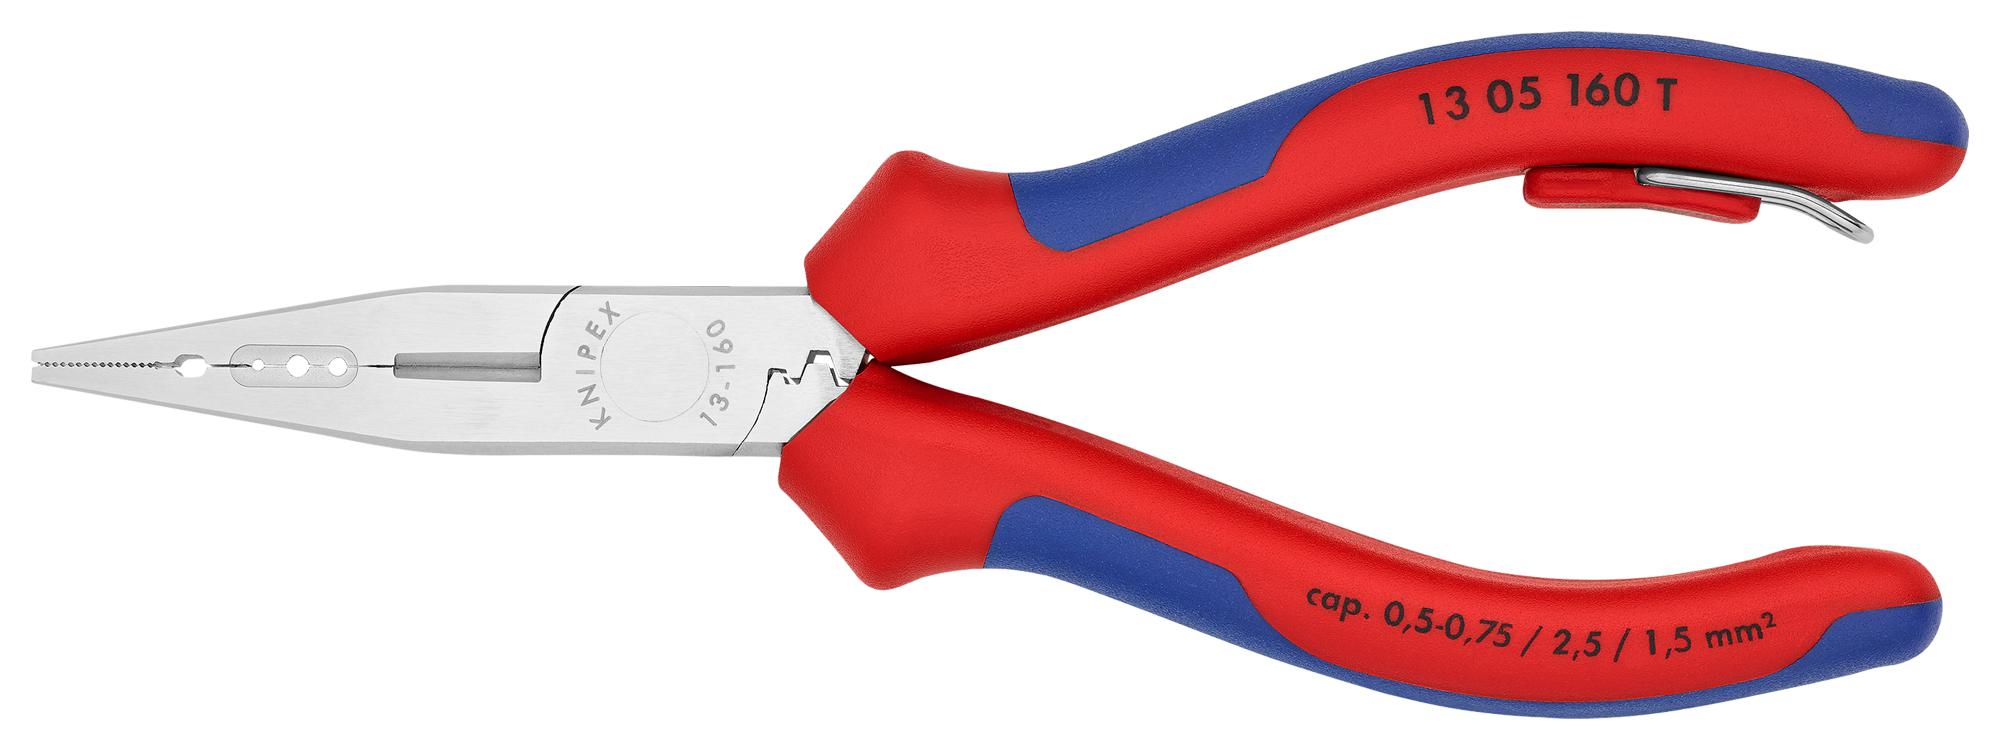 13 05 160 T ELECTRICIAN PLIER, 160MM, 0.5-2.5MM2 KNIPEX